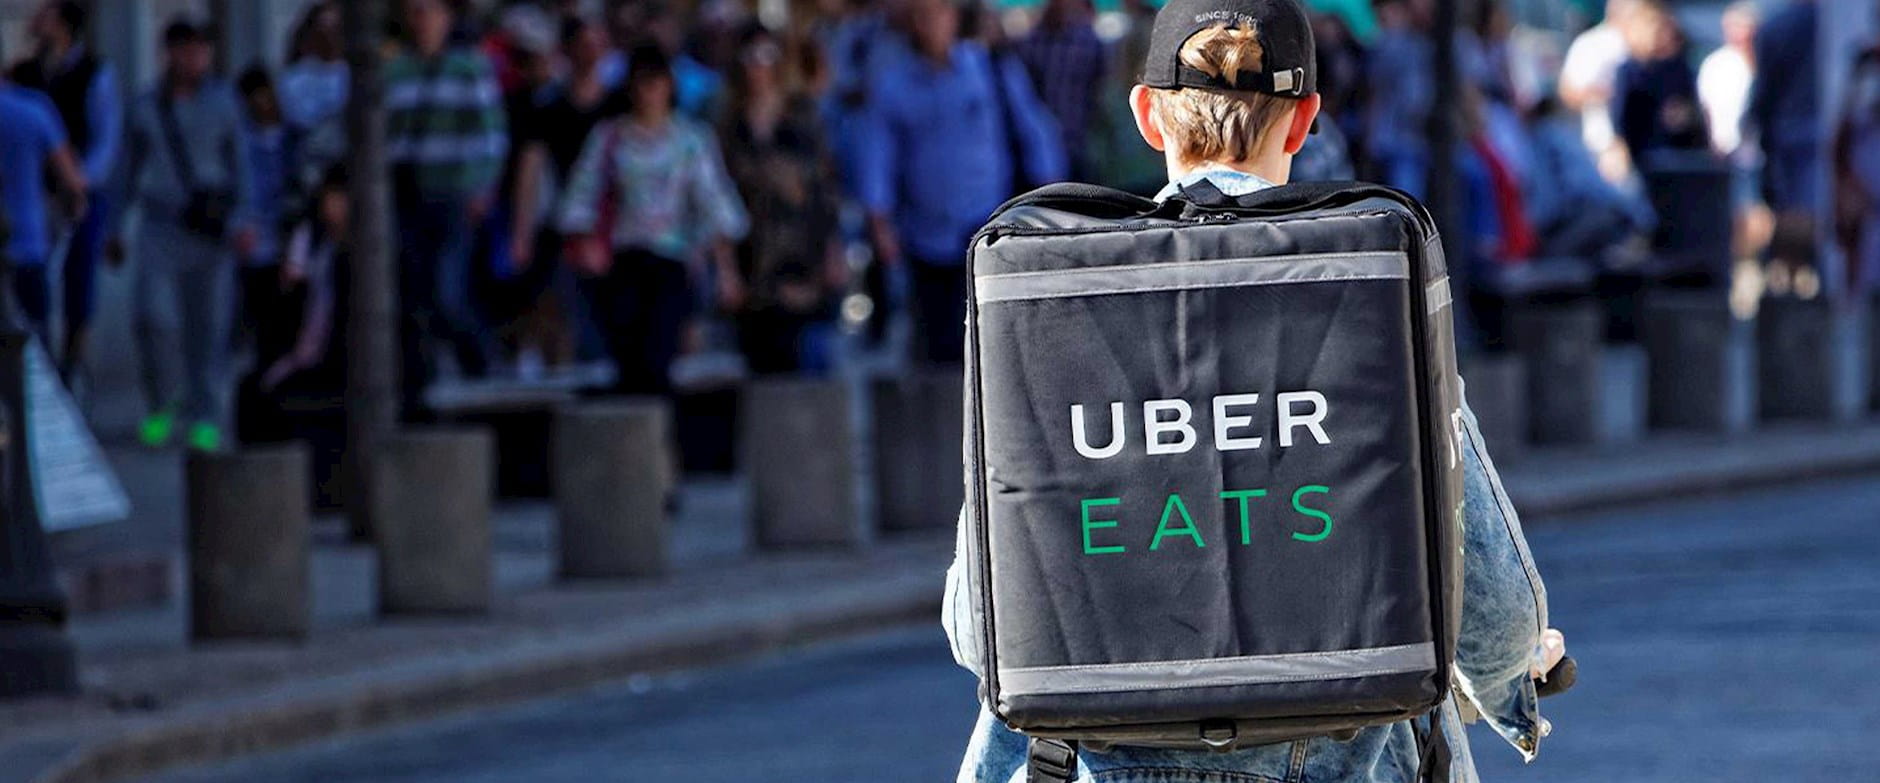 Uber eats delivery person 